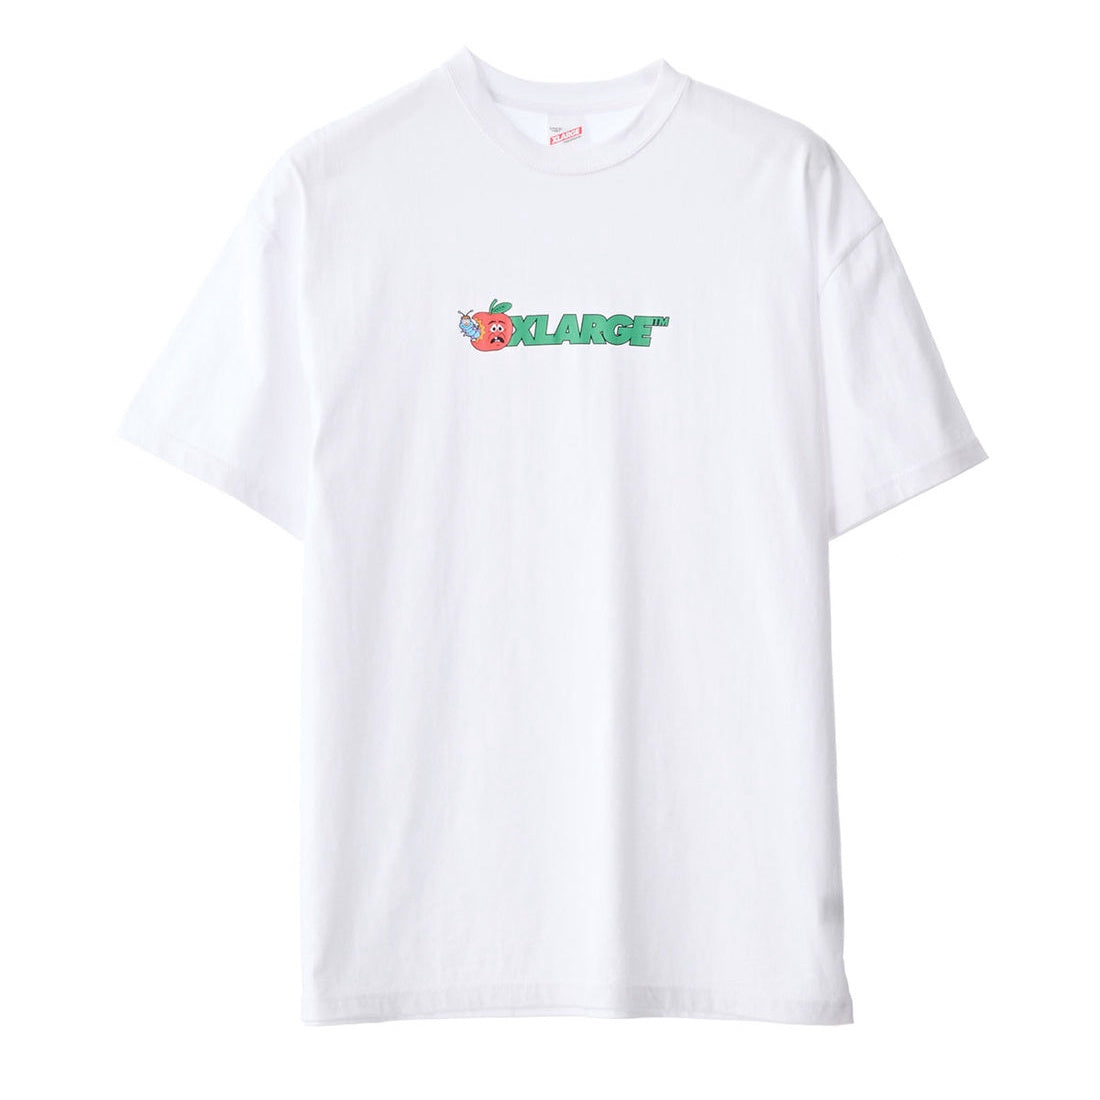 XLARGE - APPLES SS TEE - SOLID WHITE